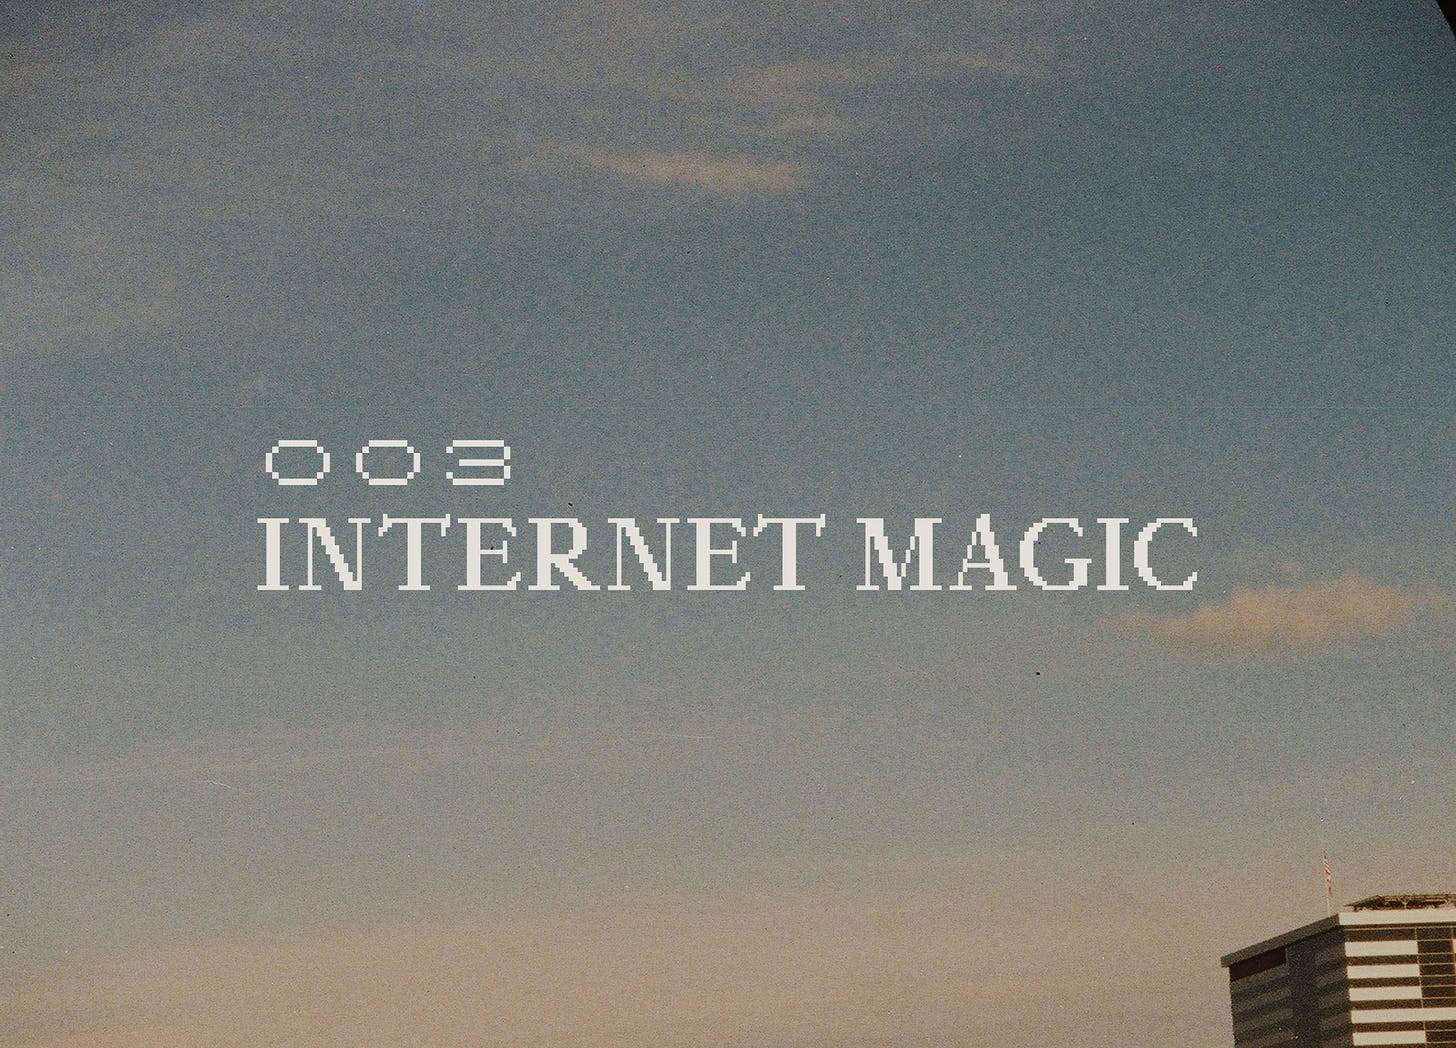 Dark orange & blue sky with sporadic clouds. Distorted film quality, reads "003 Internet Magic" in a pixelated serif font.